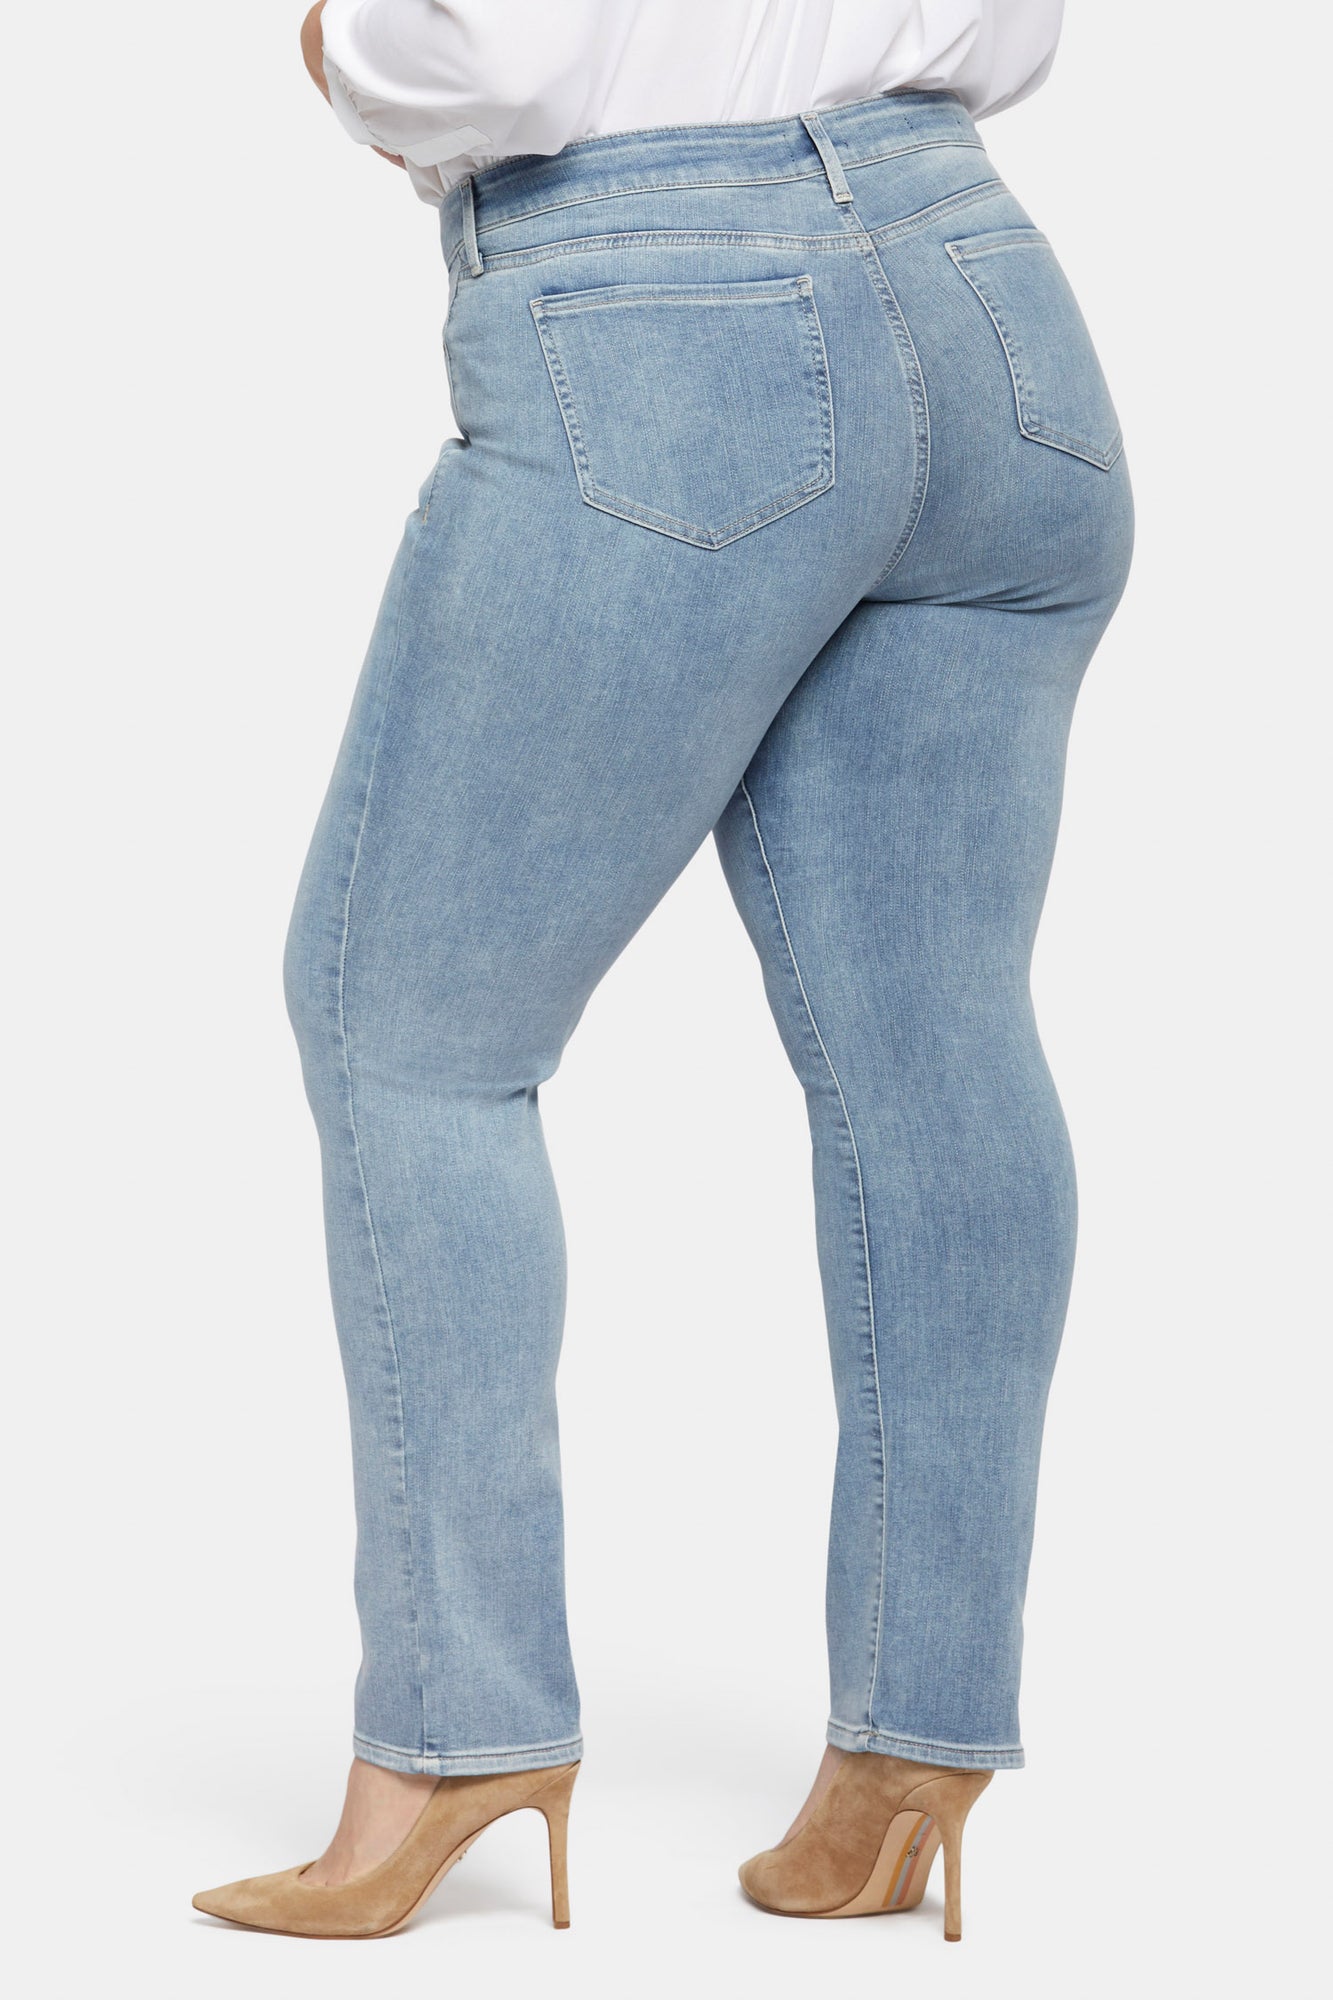 NYDJ Marilyn Straight Jeans In Plus Size  - Haley